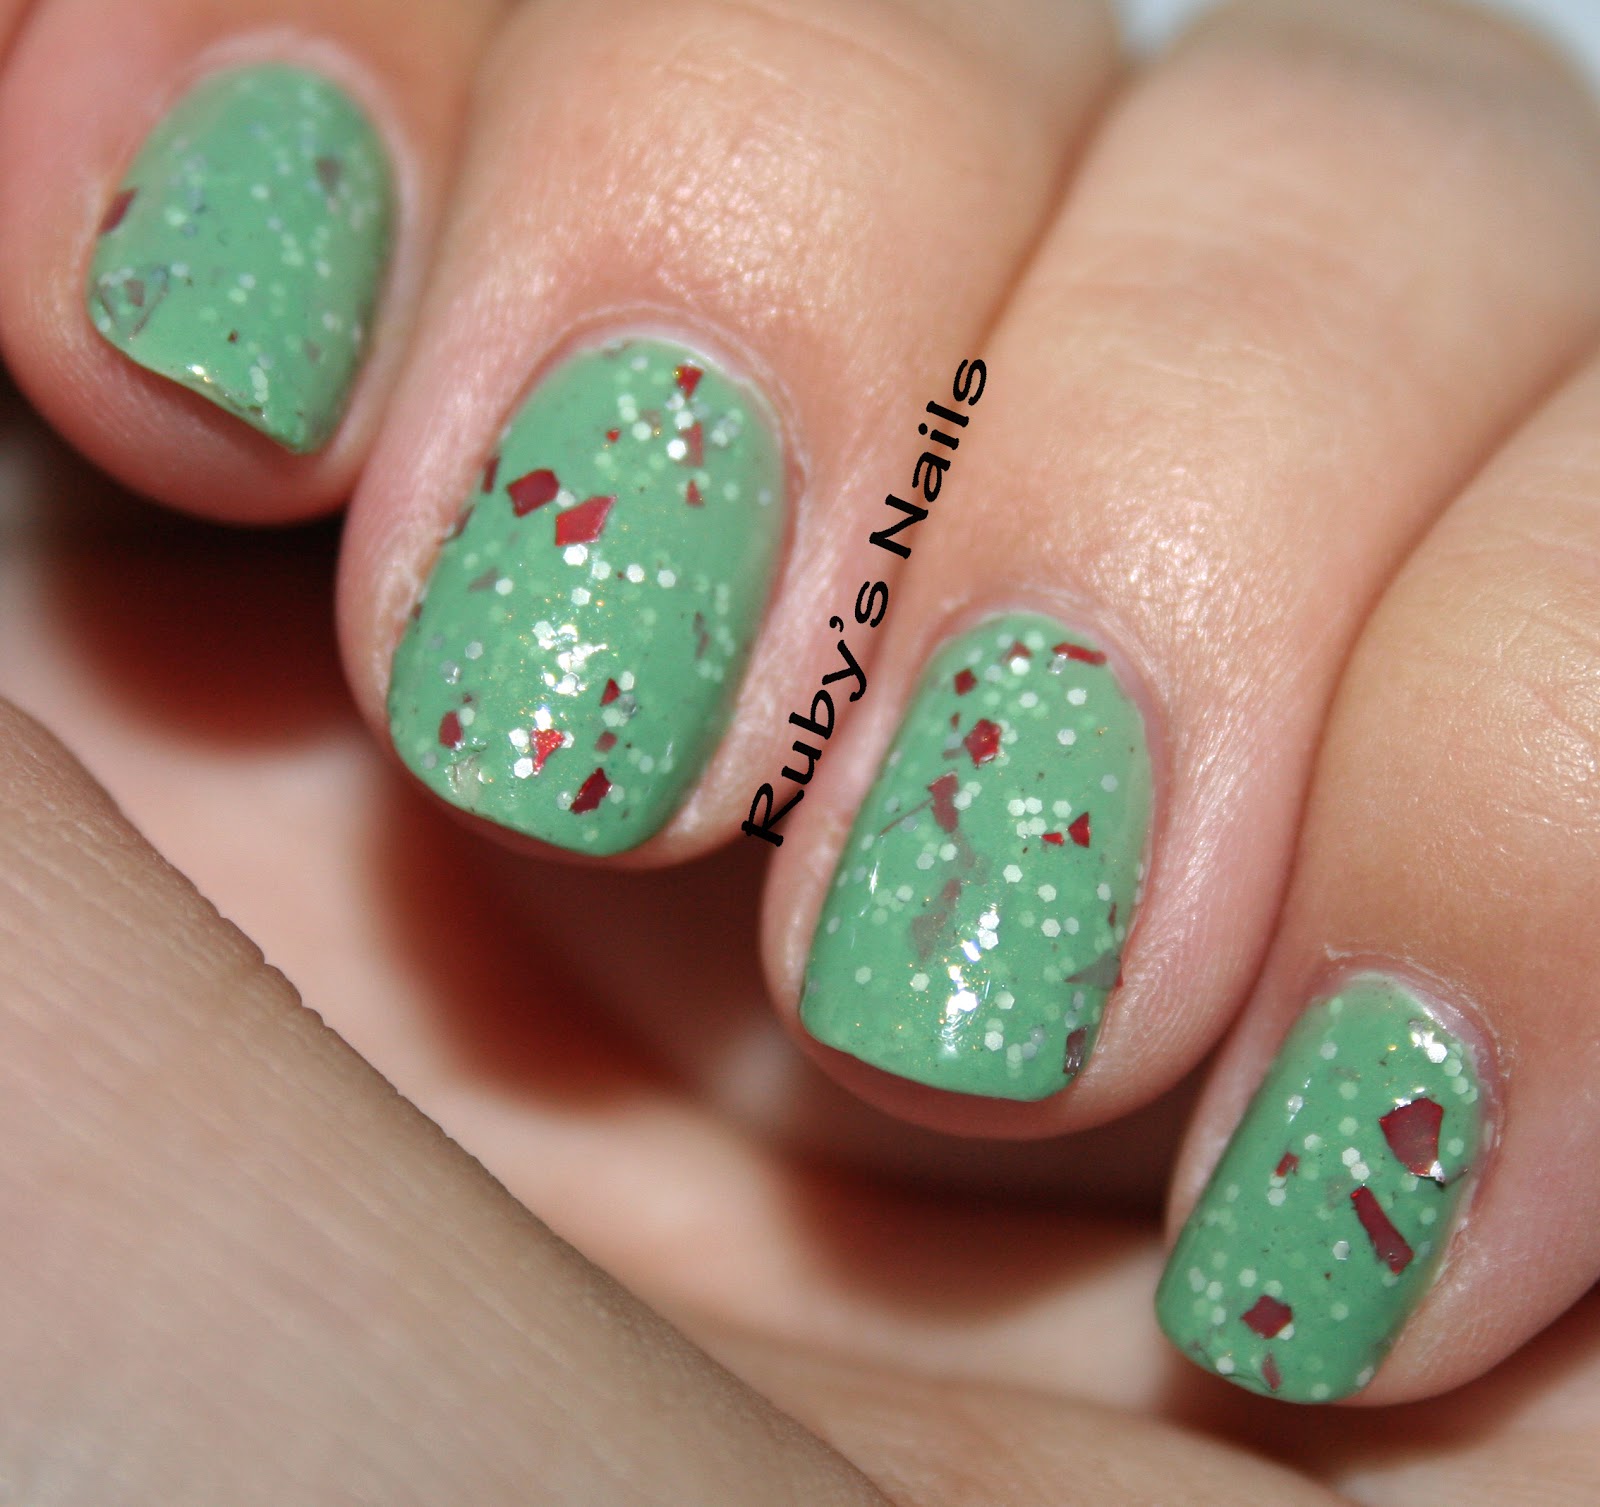 Ruby's Nails: Sassy Lacquer Boughs of Mint Holly